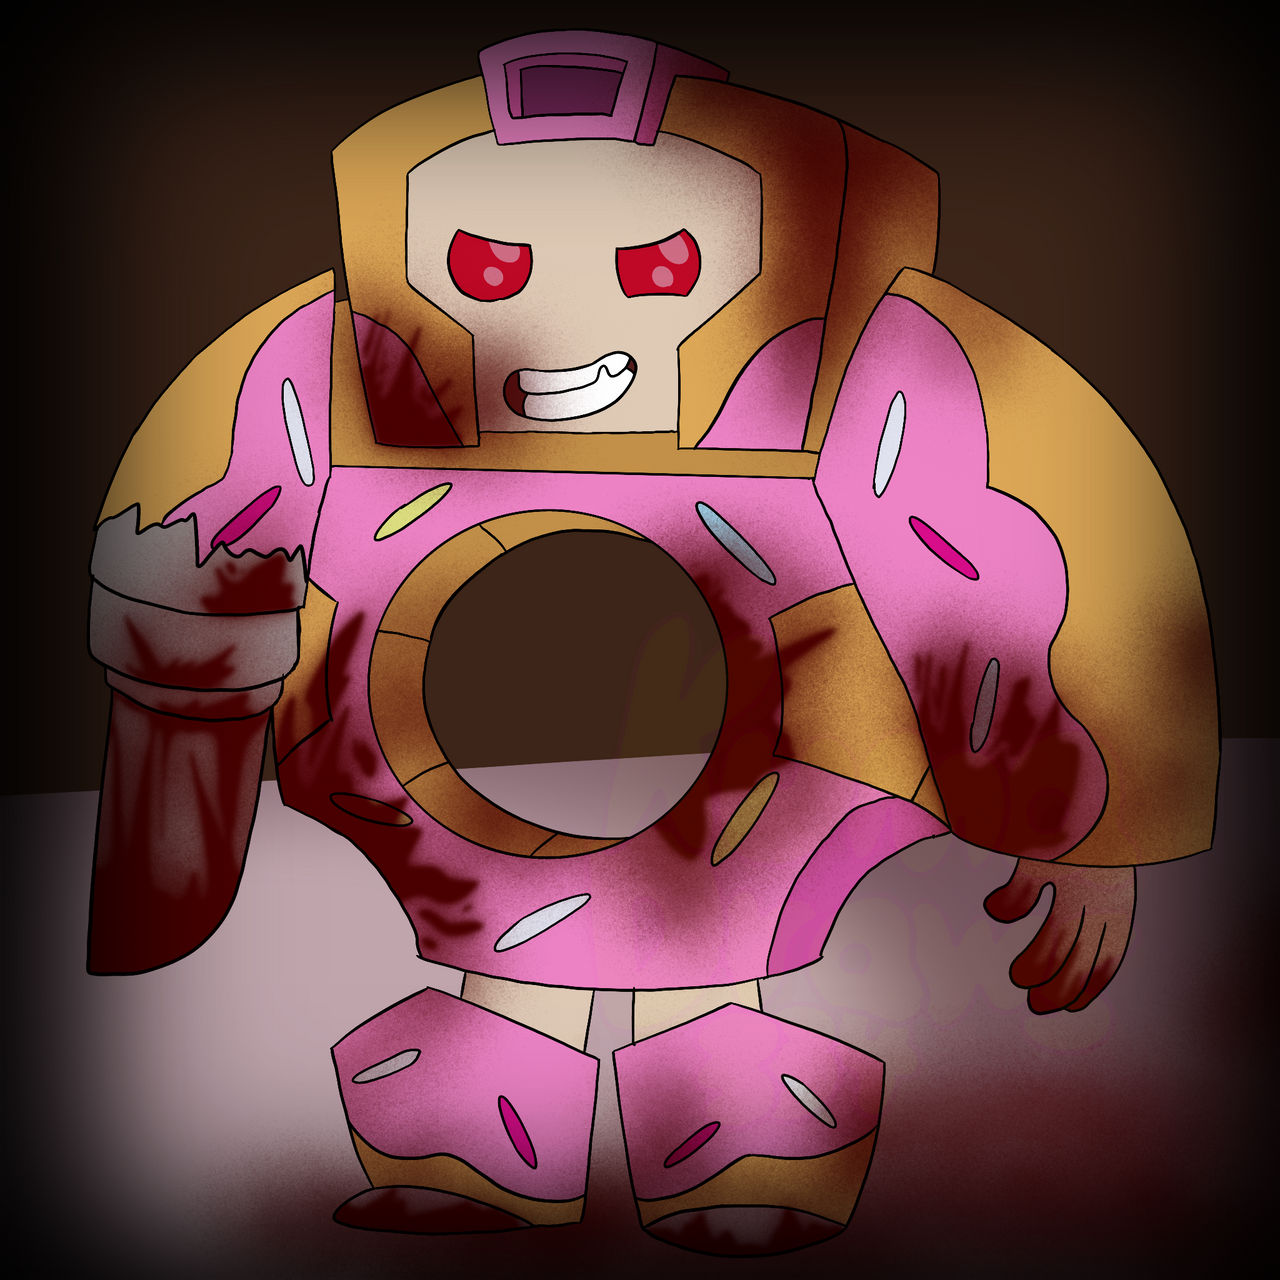 Boxy Boo in other AUs by KumaDraws334 on DeviantArt